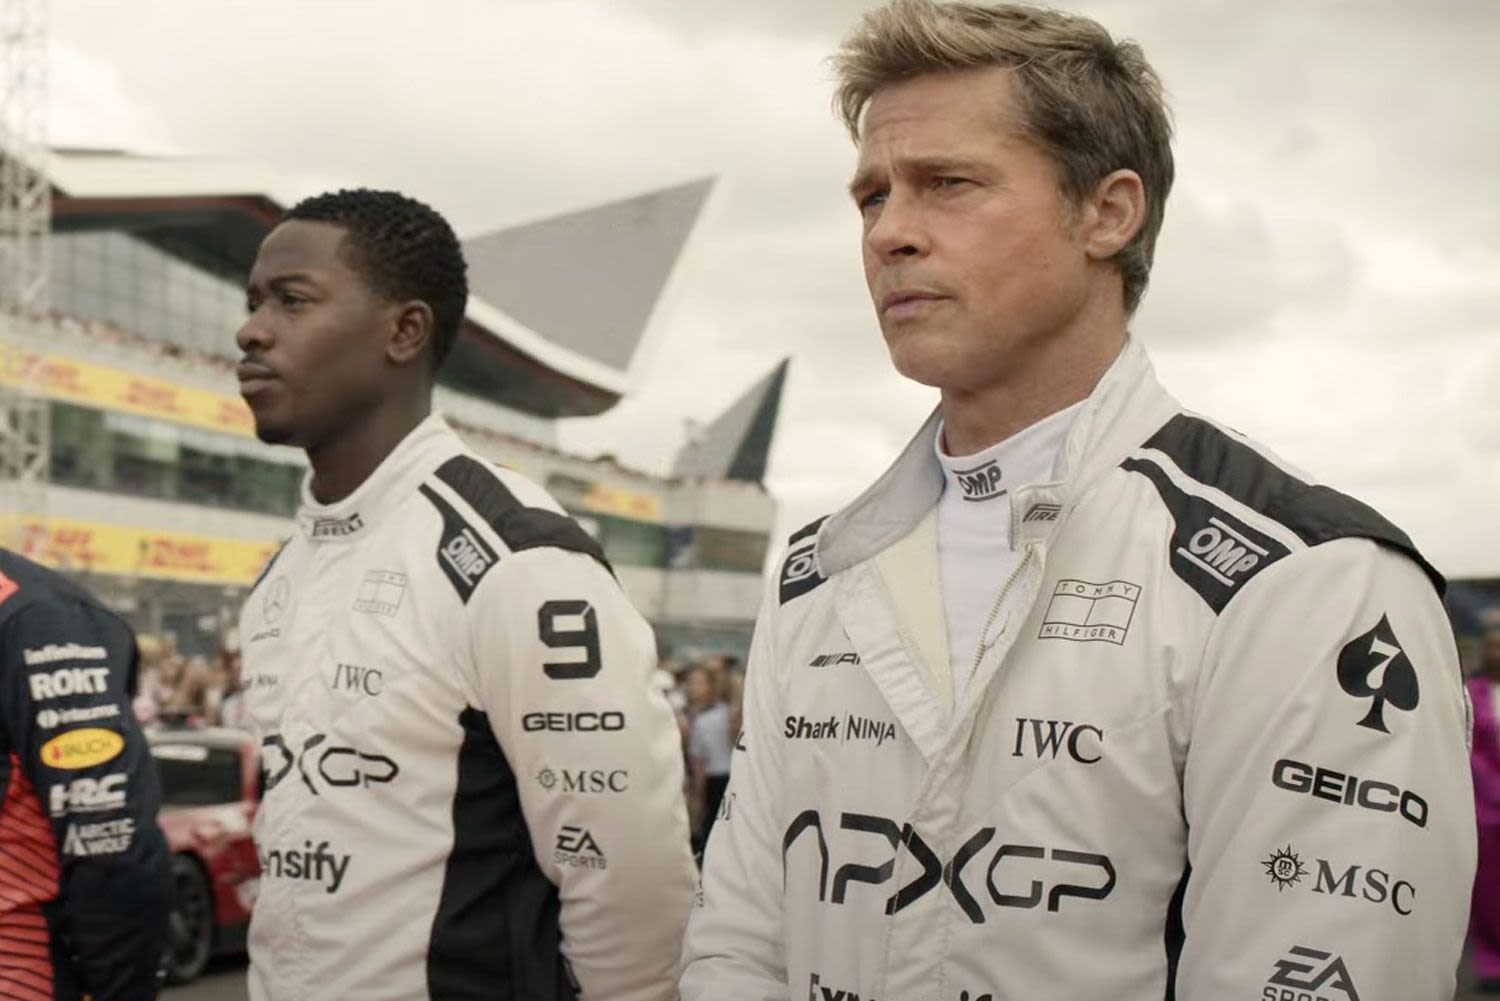 Brad Pitt is firmly in the driver's seat in new 'F1' teaser trailer